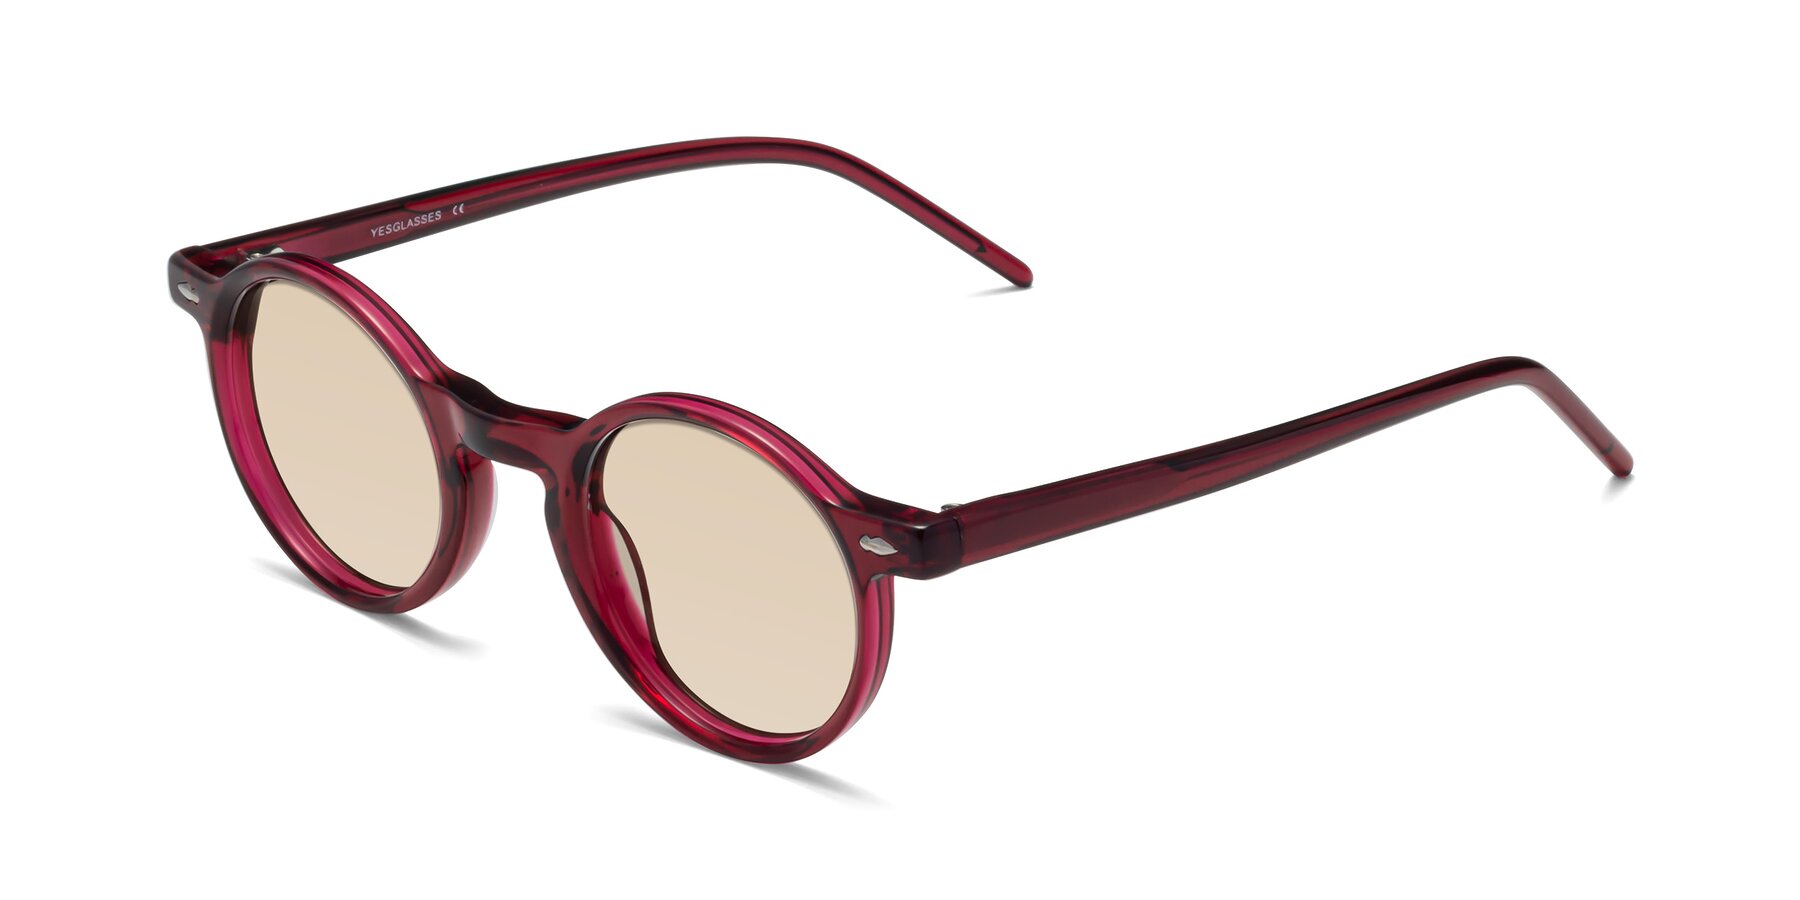 Angle of 1542 in Plum with Light Brown Tinted Lenses